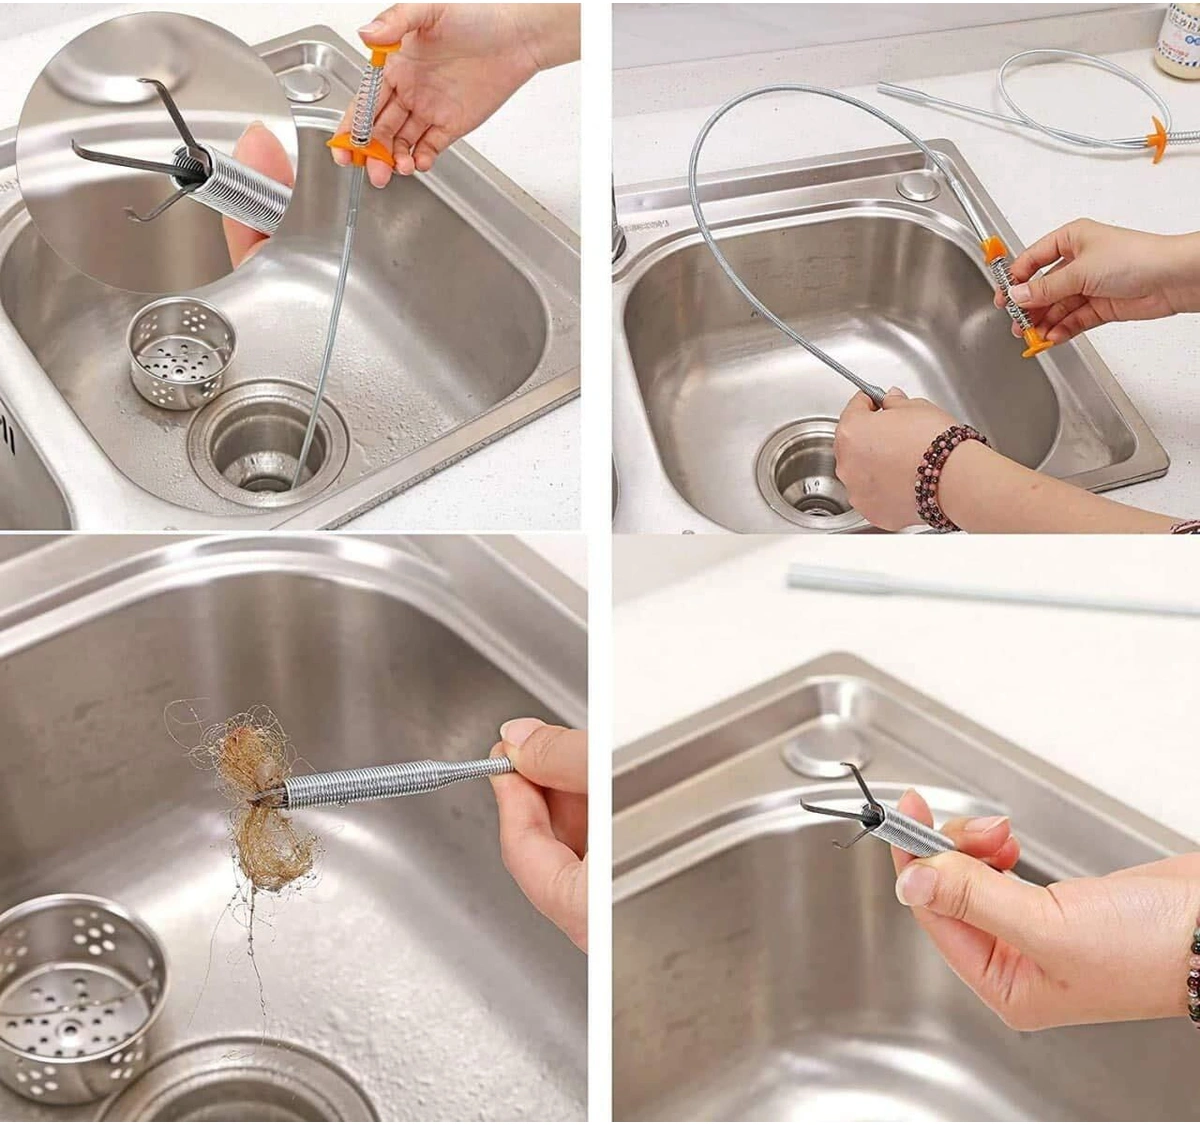 Bathroom Spring Pipe Dredging Tools Kitchen Sink Cleaning Hair Catcher Hair  Clog Remover Grabber for Shower Drains Bath Basin